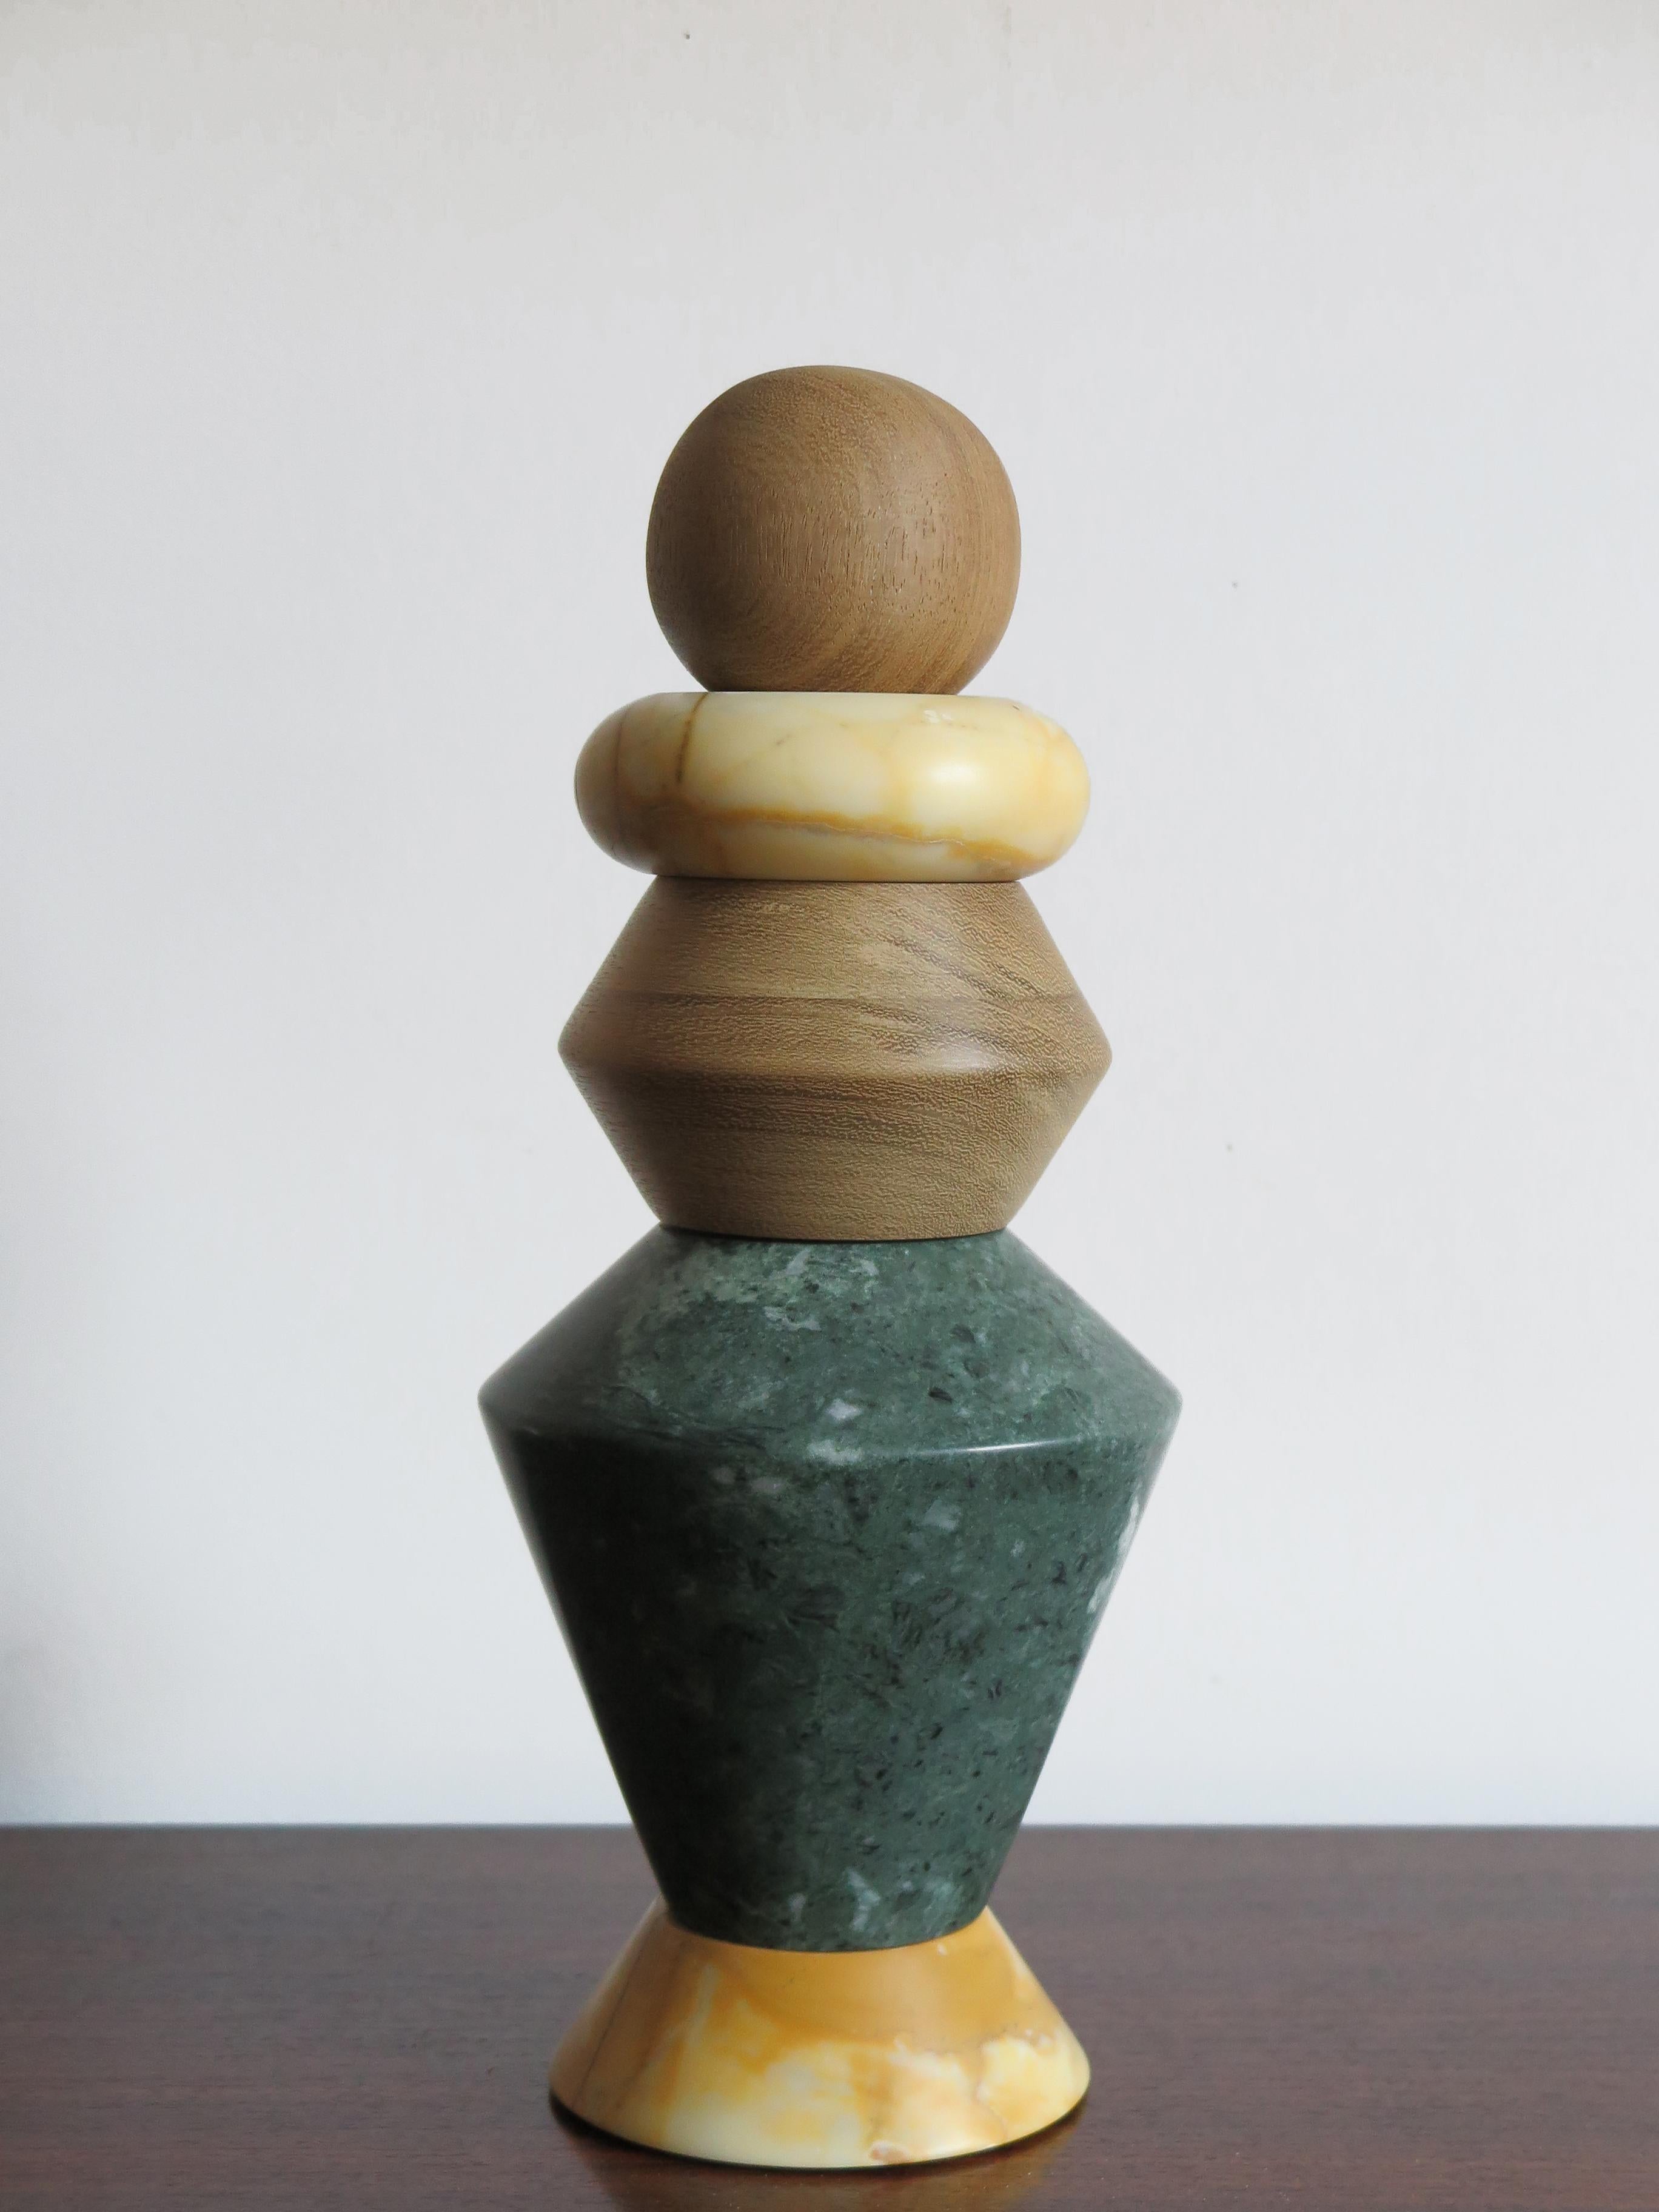 Marble and Wood Contemporary Sculpture, Flower Vase 